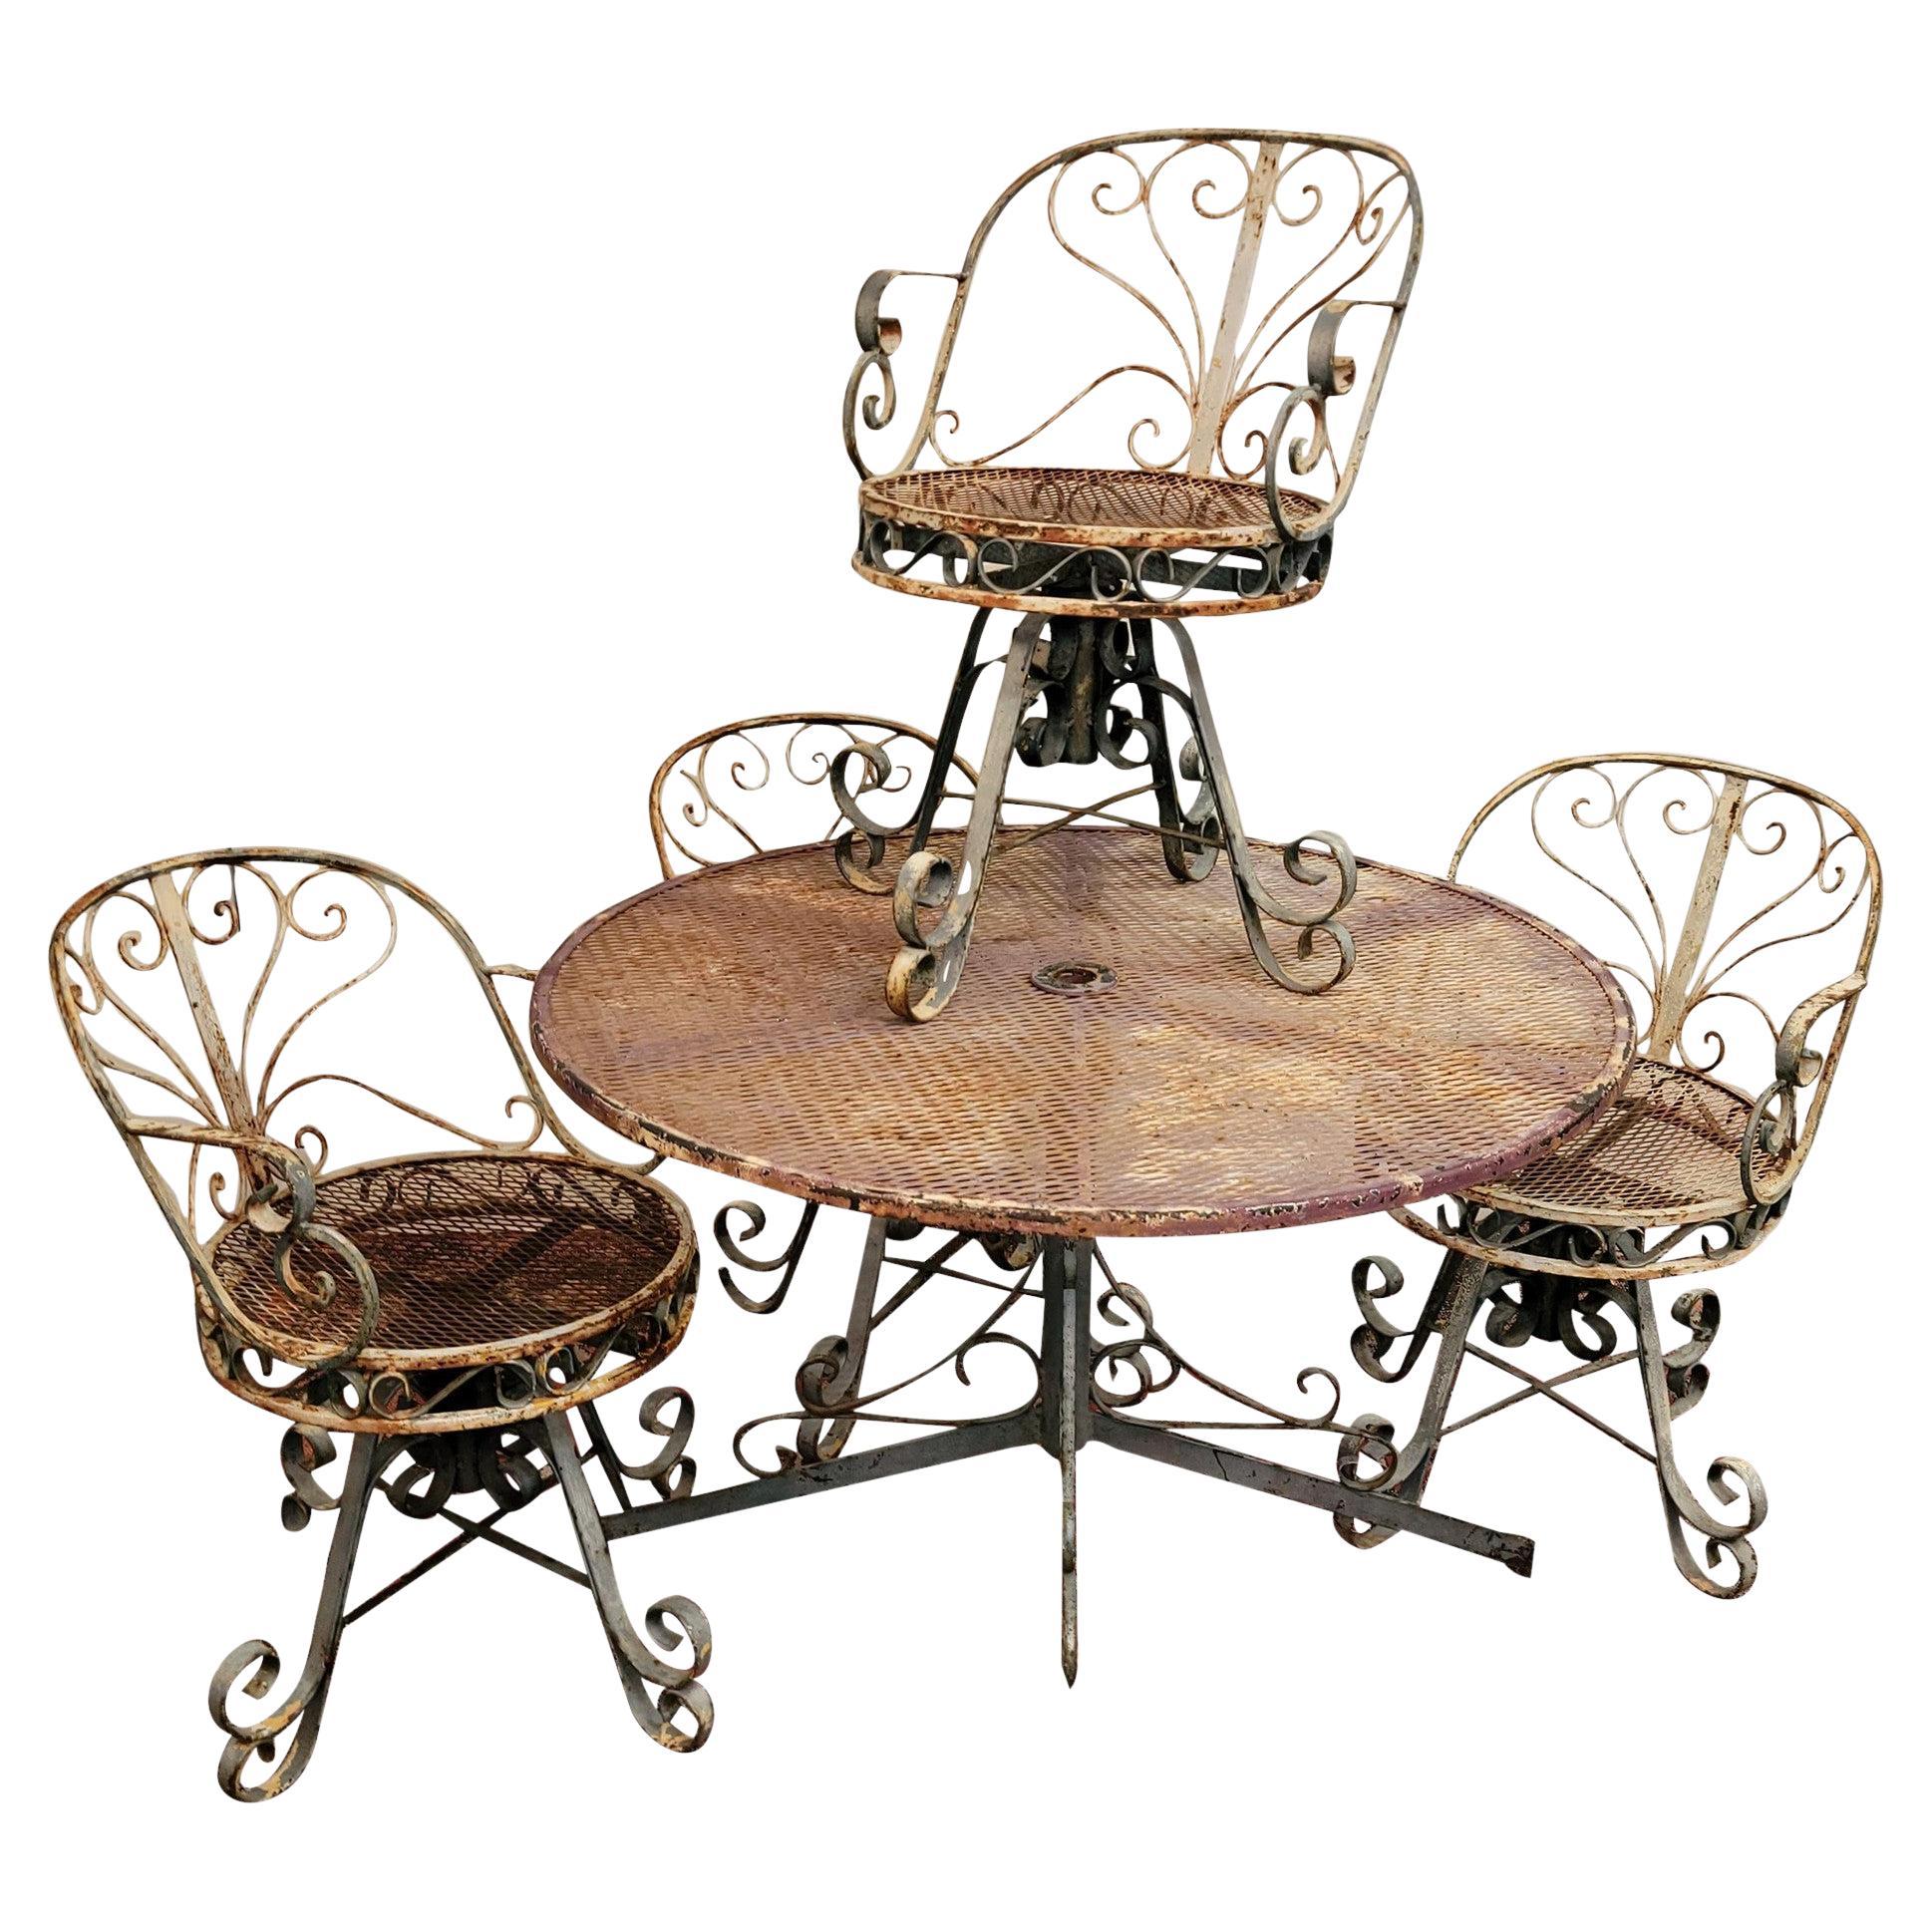 Vintage Iron Garden Table & 4 Chairs For Sale